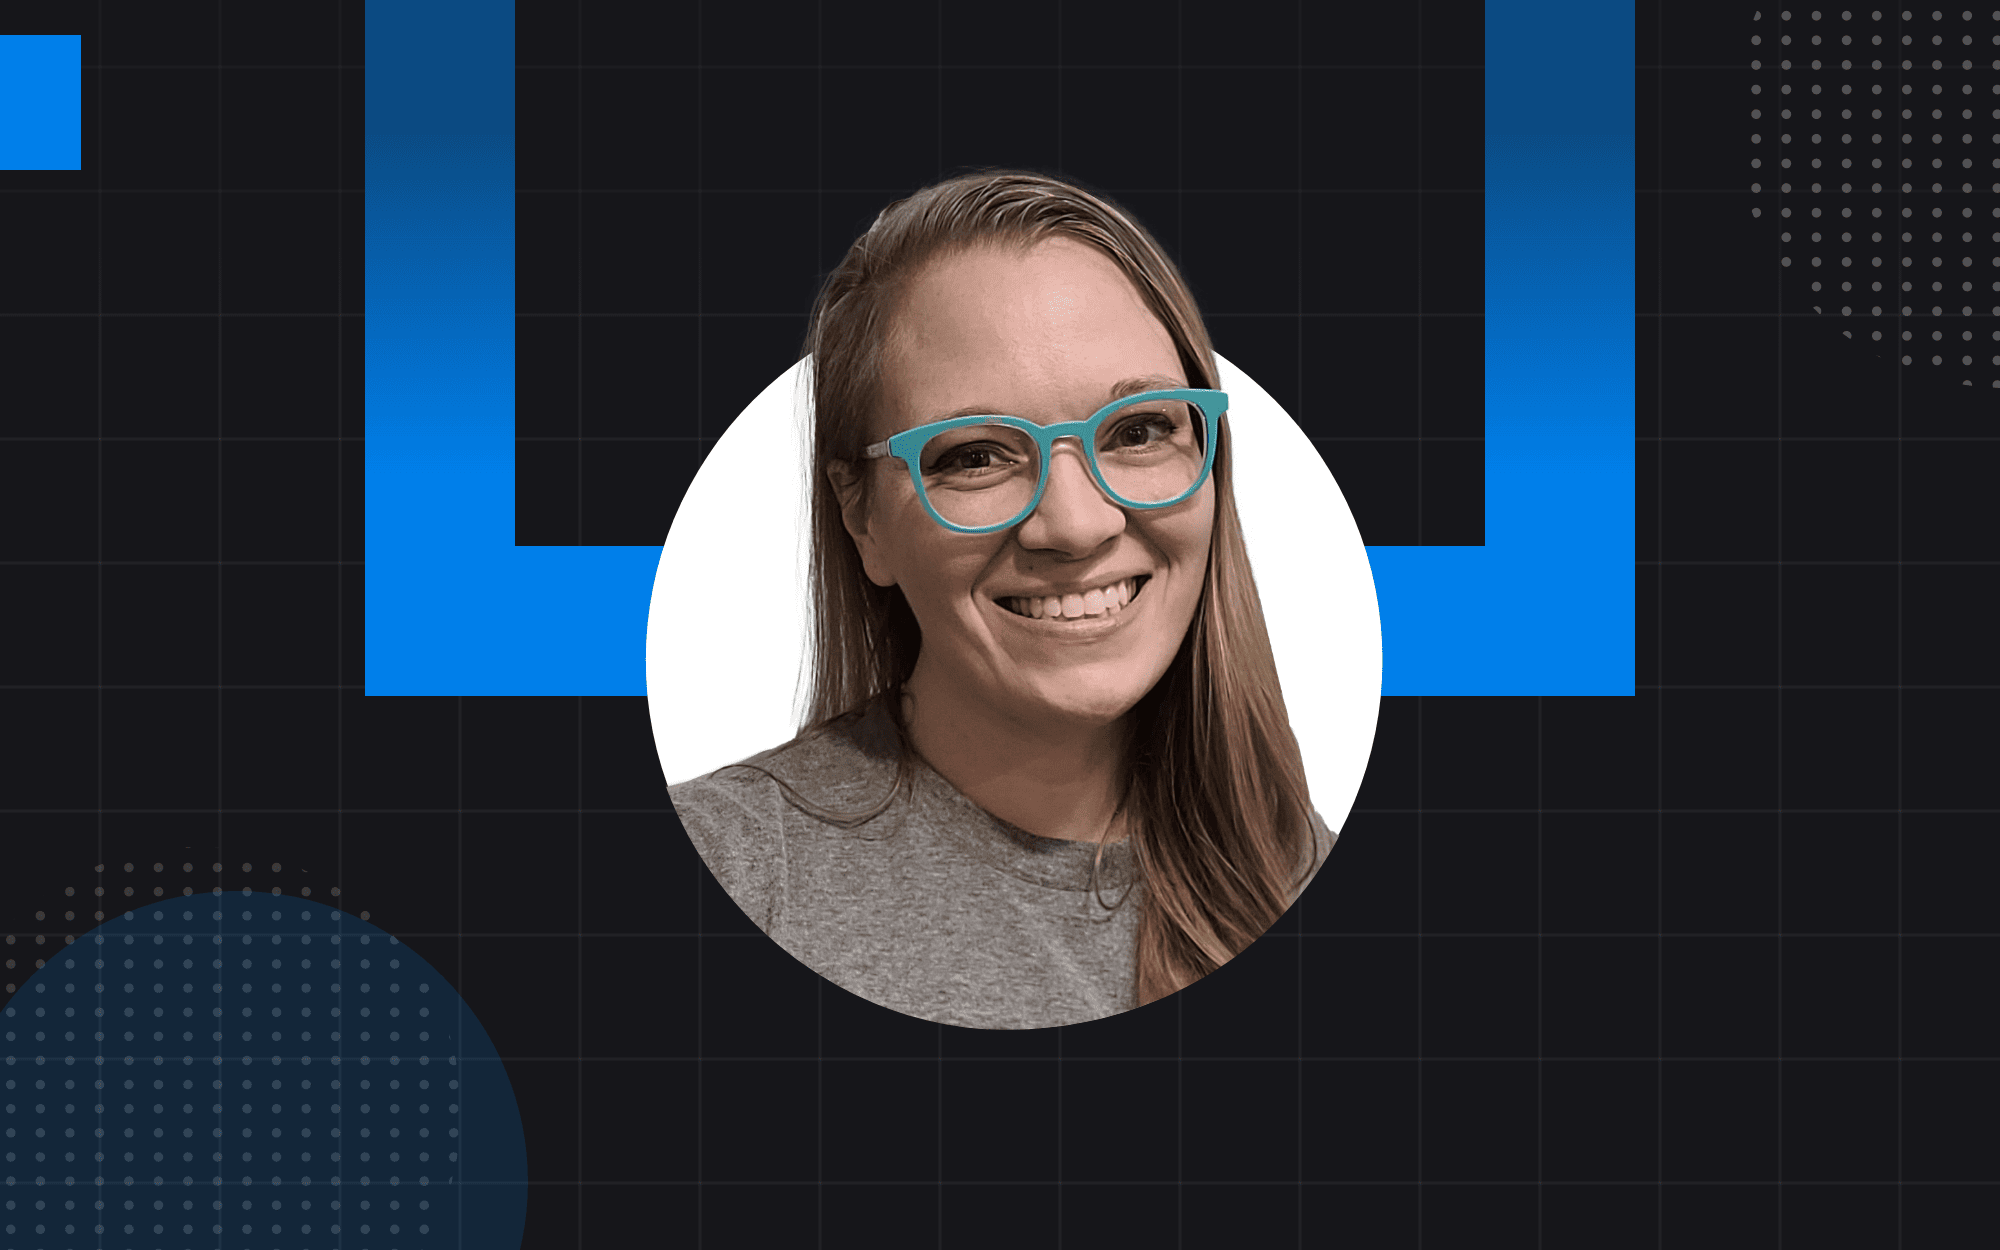 Developer, Buffy Esslinger is shown in the middle of black, blue and white sleek graphics.